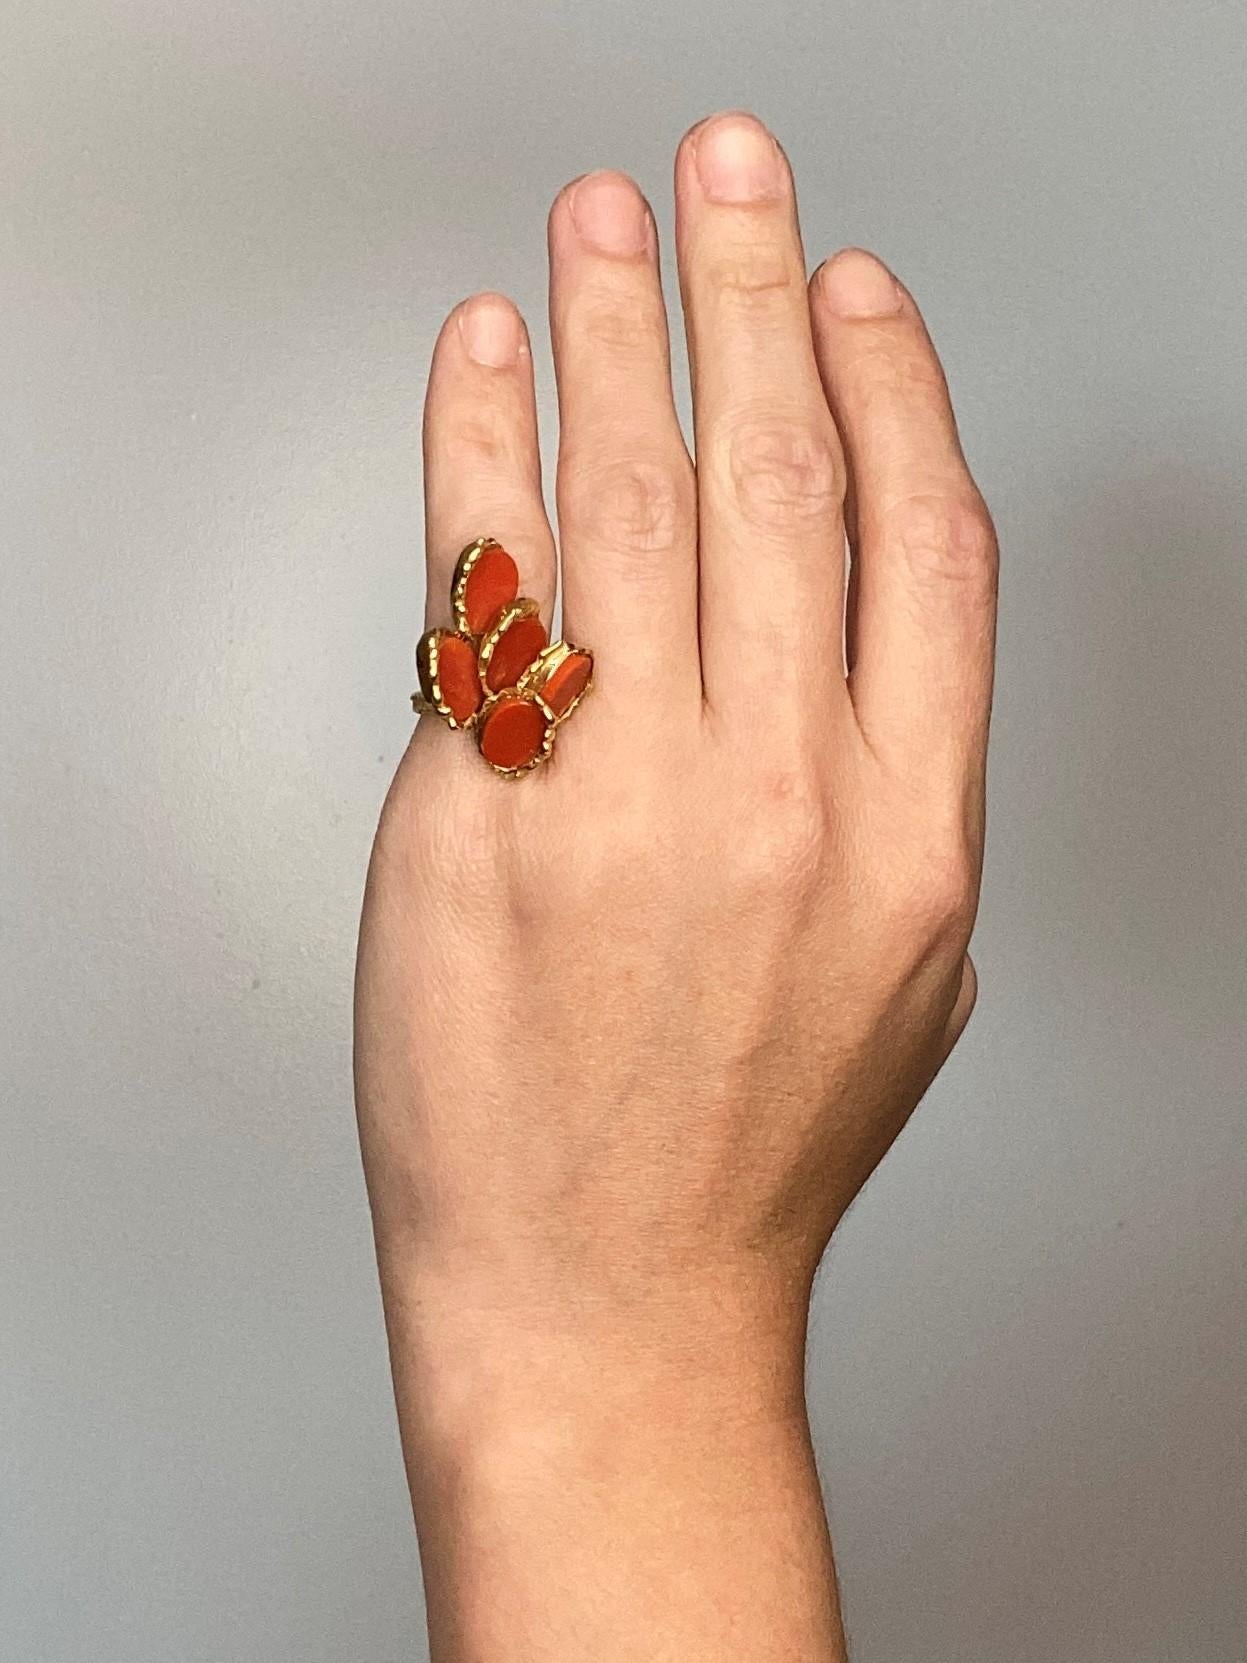 A rare ring designed by Chaumet.

Created by the house of Chaumet in Paris, France at the beginning of the 1970's It was crafted in solid yellow gold of 18 karats, with textured organic motifs. 

Embellished with 5 carved oval pieces of reddish